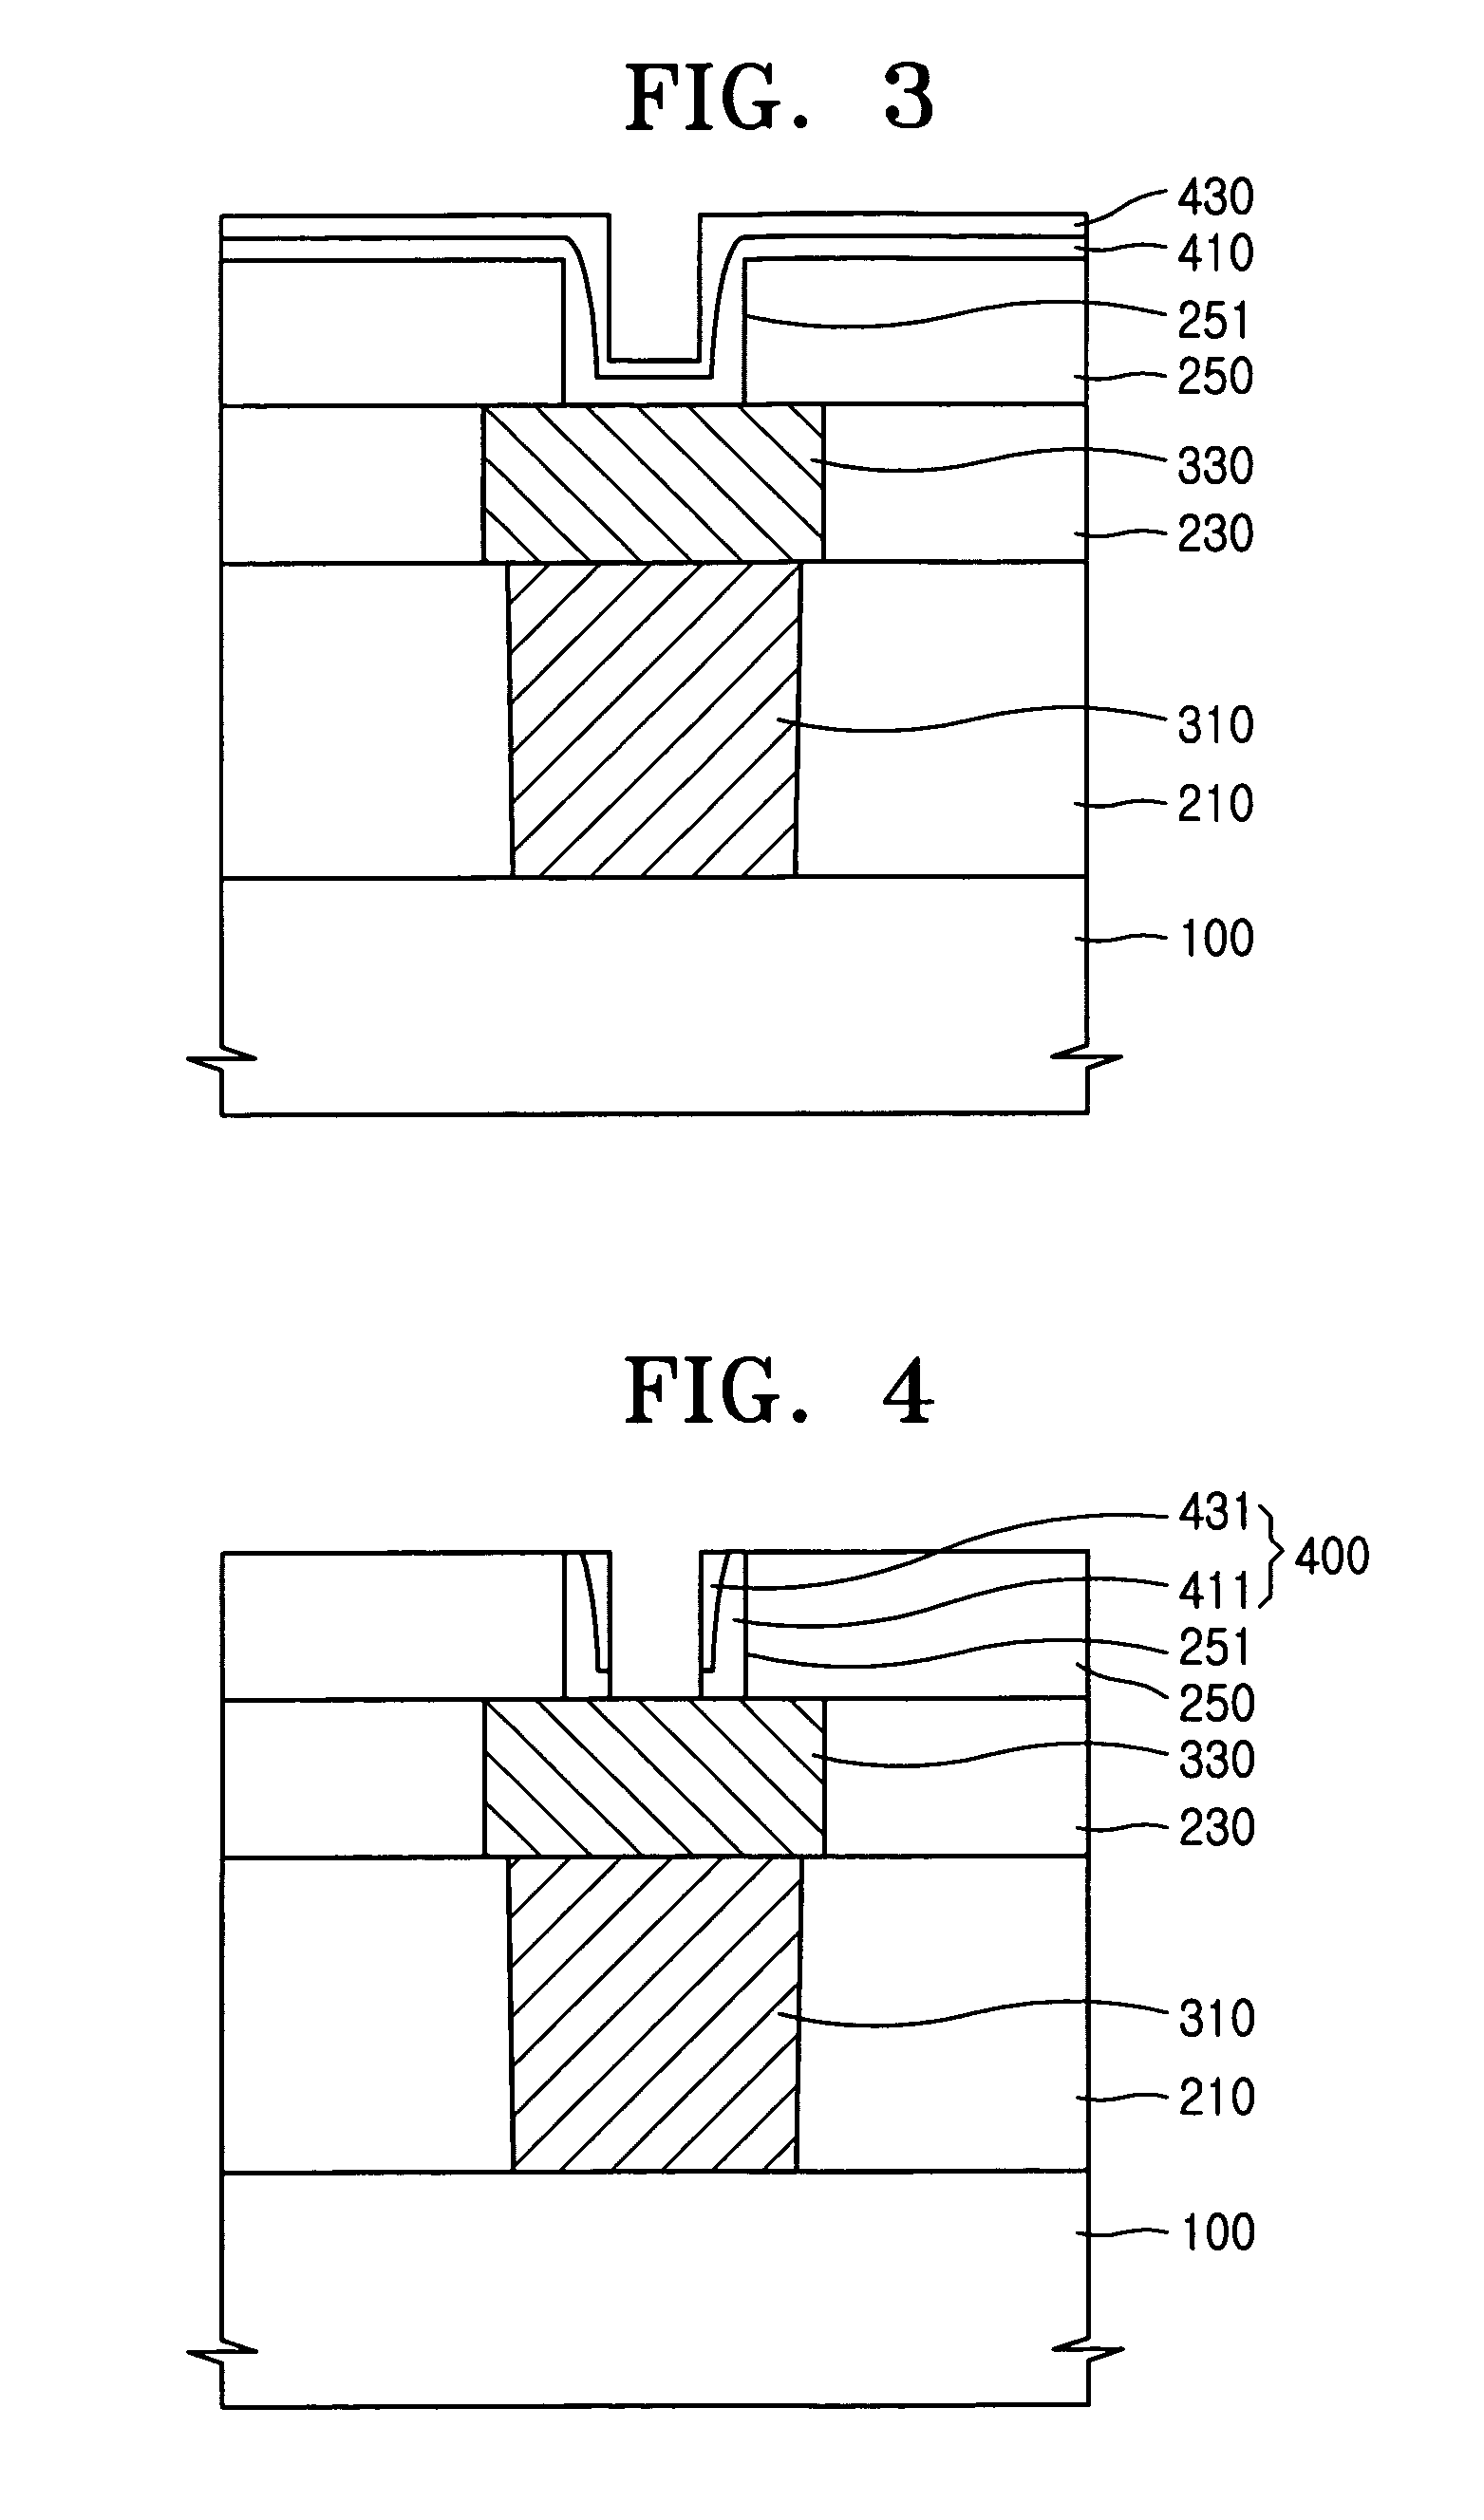 Phase change memory elements and methods of fabricating phase change memory elements having a confined portion of phase change material on a recessed contact